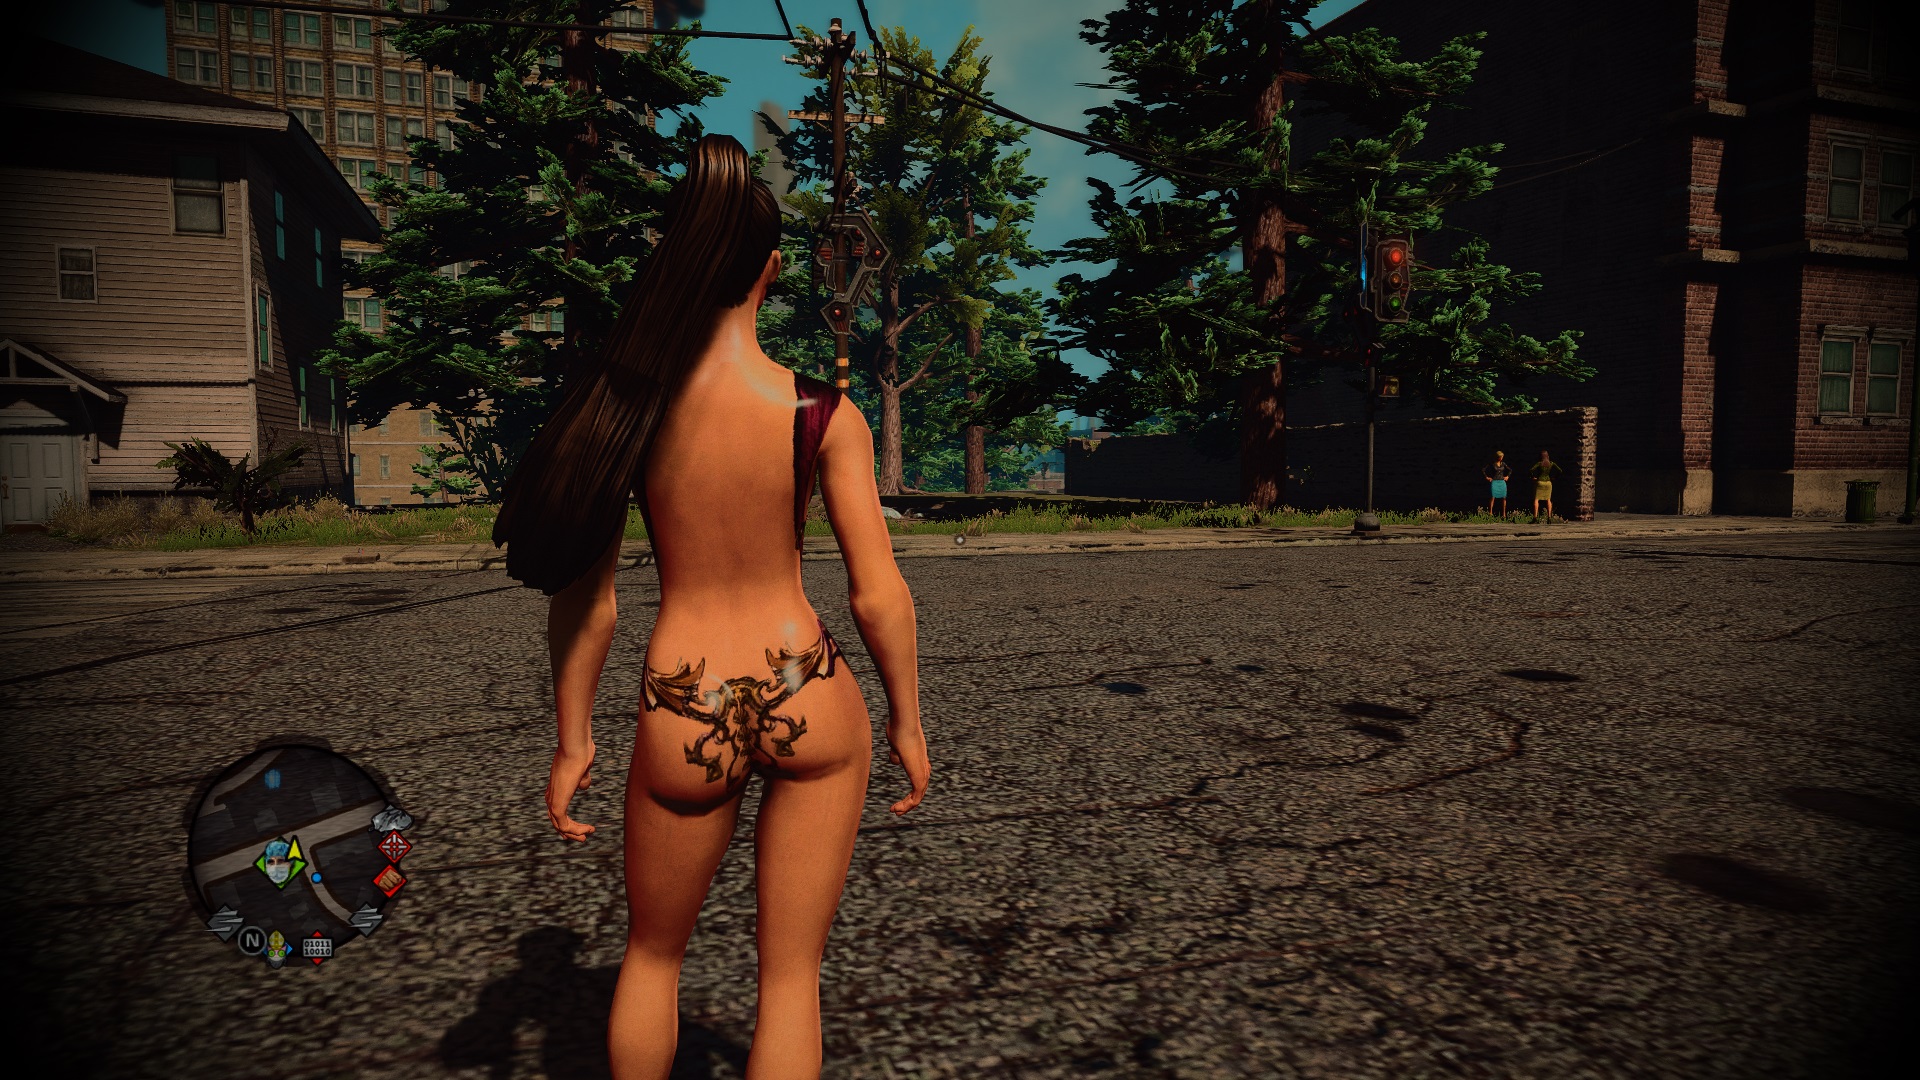 charlie jacobs recommends saints row nude mods pic